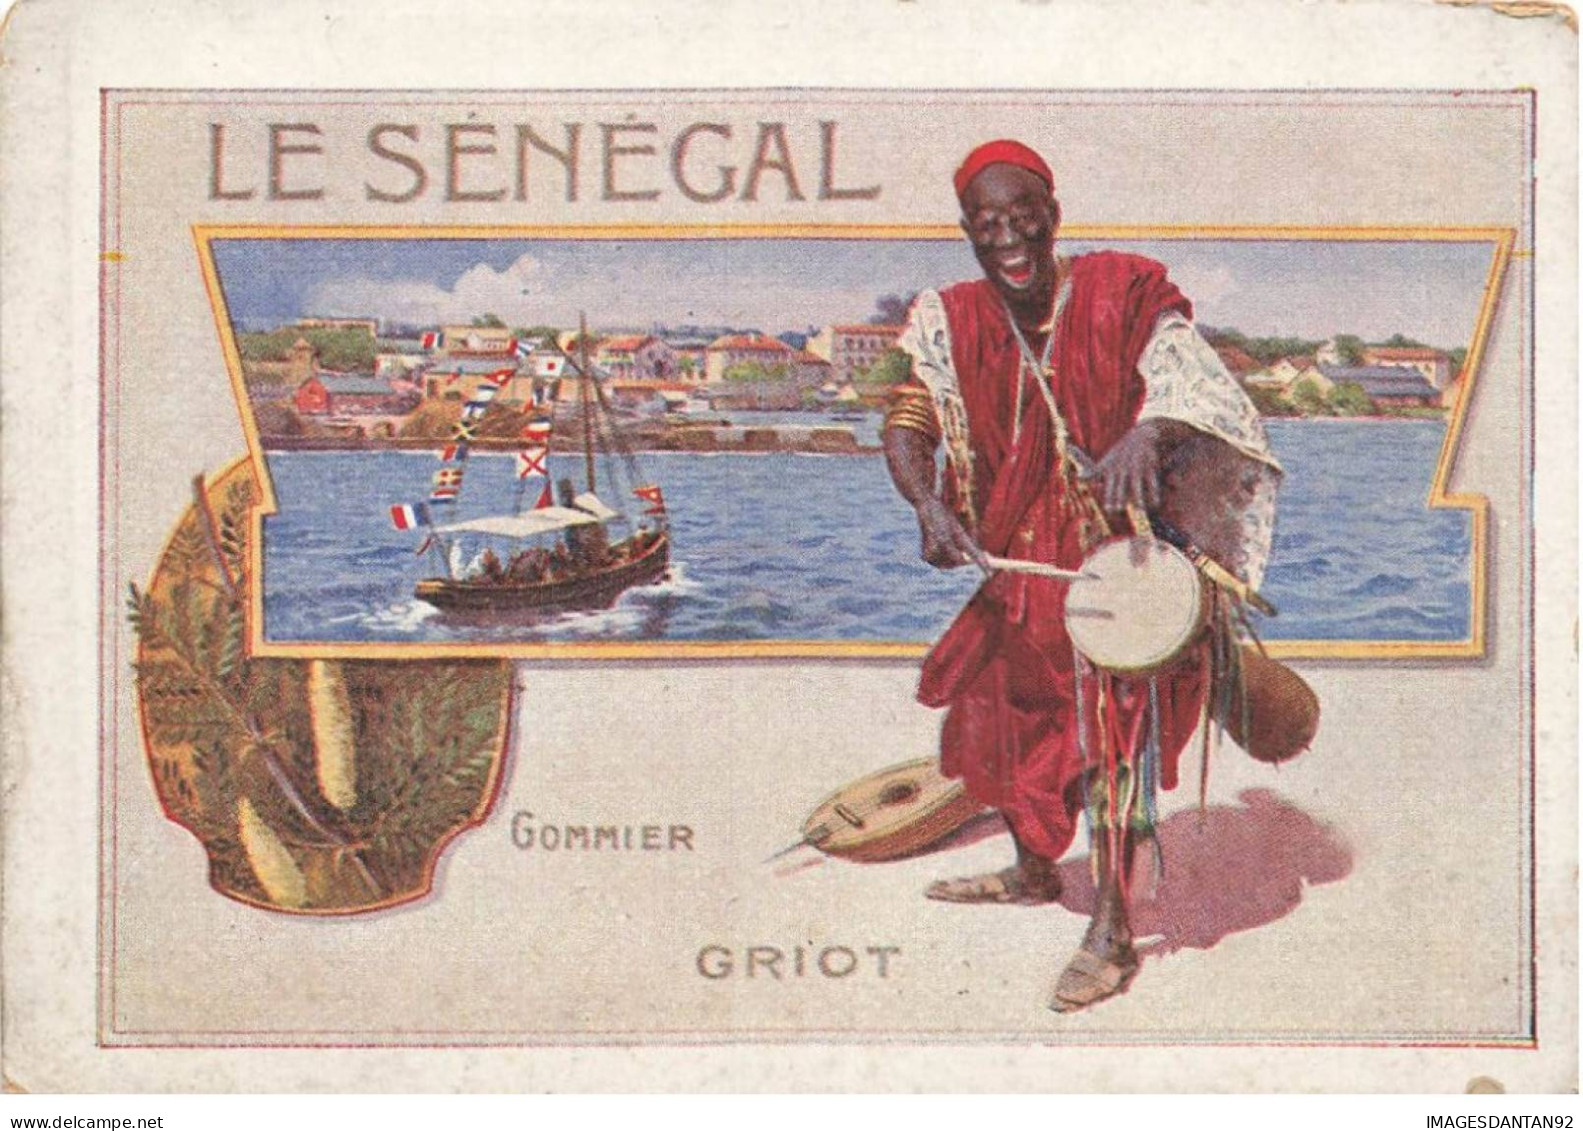 CHROMOS AG#MK1045 LE SENEGAL GOMMIER GRIOT CHICOREE EXTRA LEROUX - Thee & Koffie